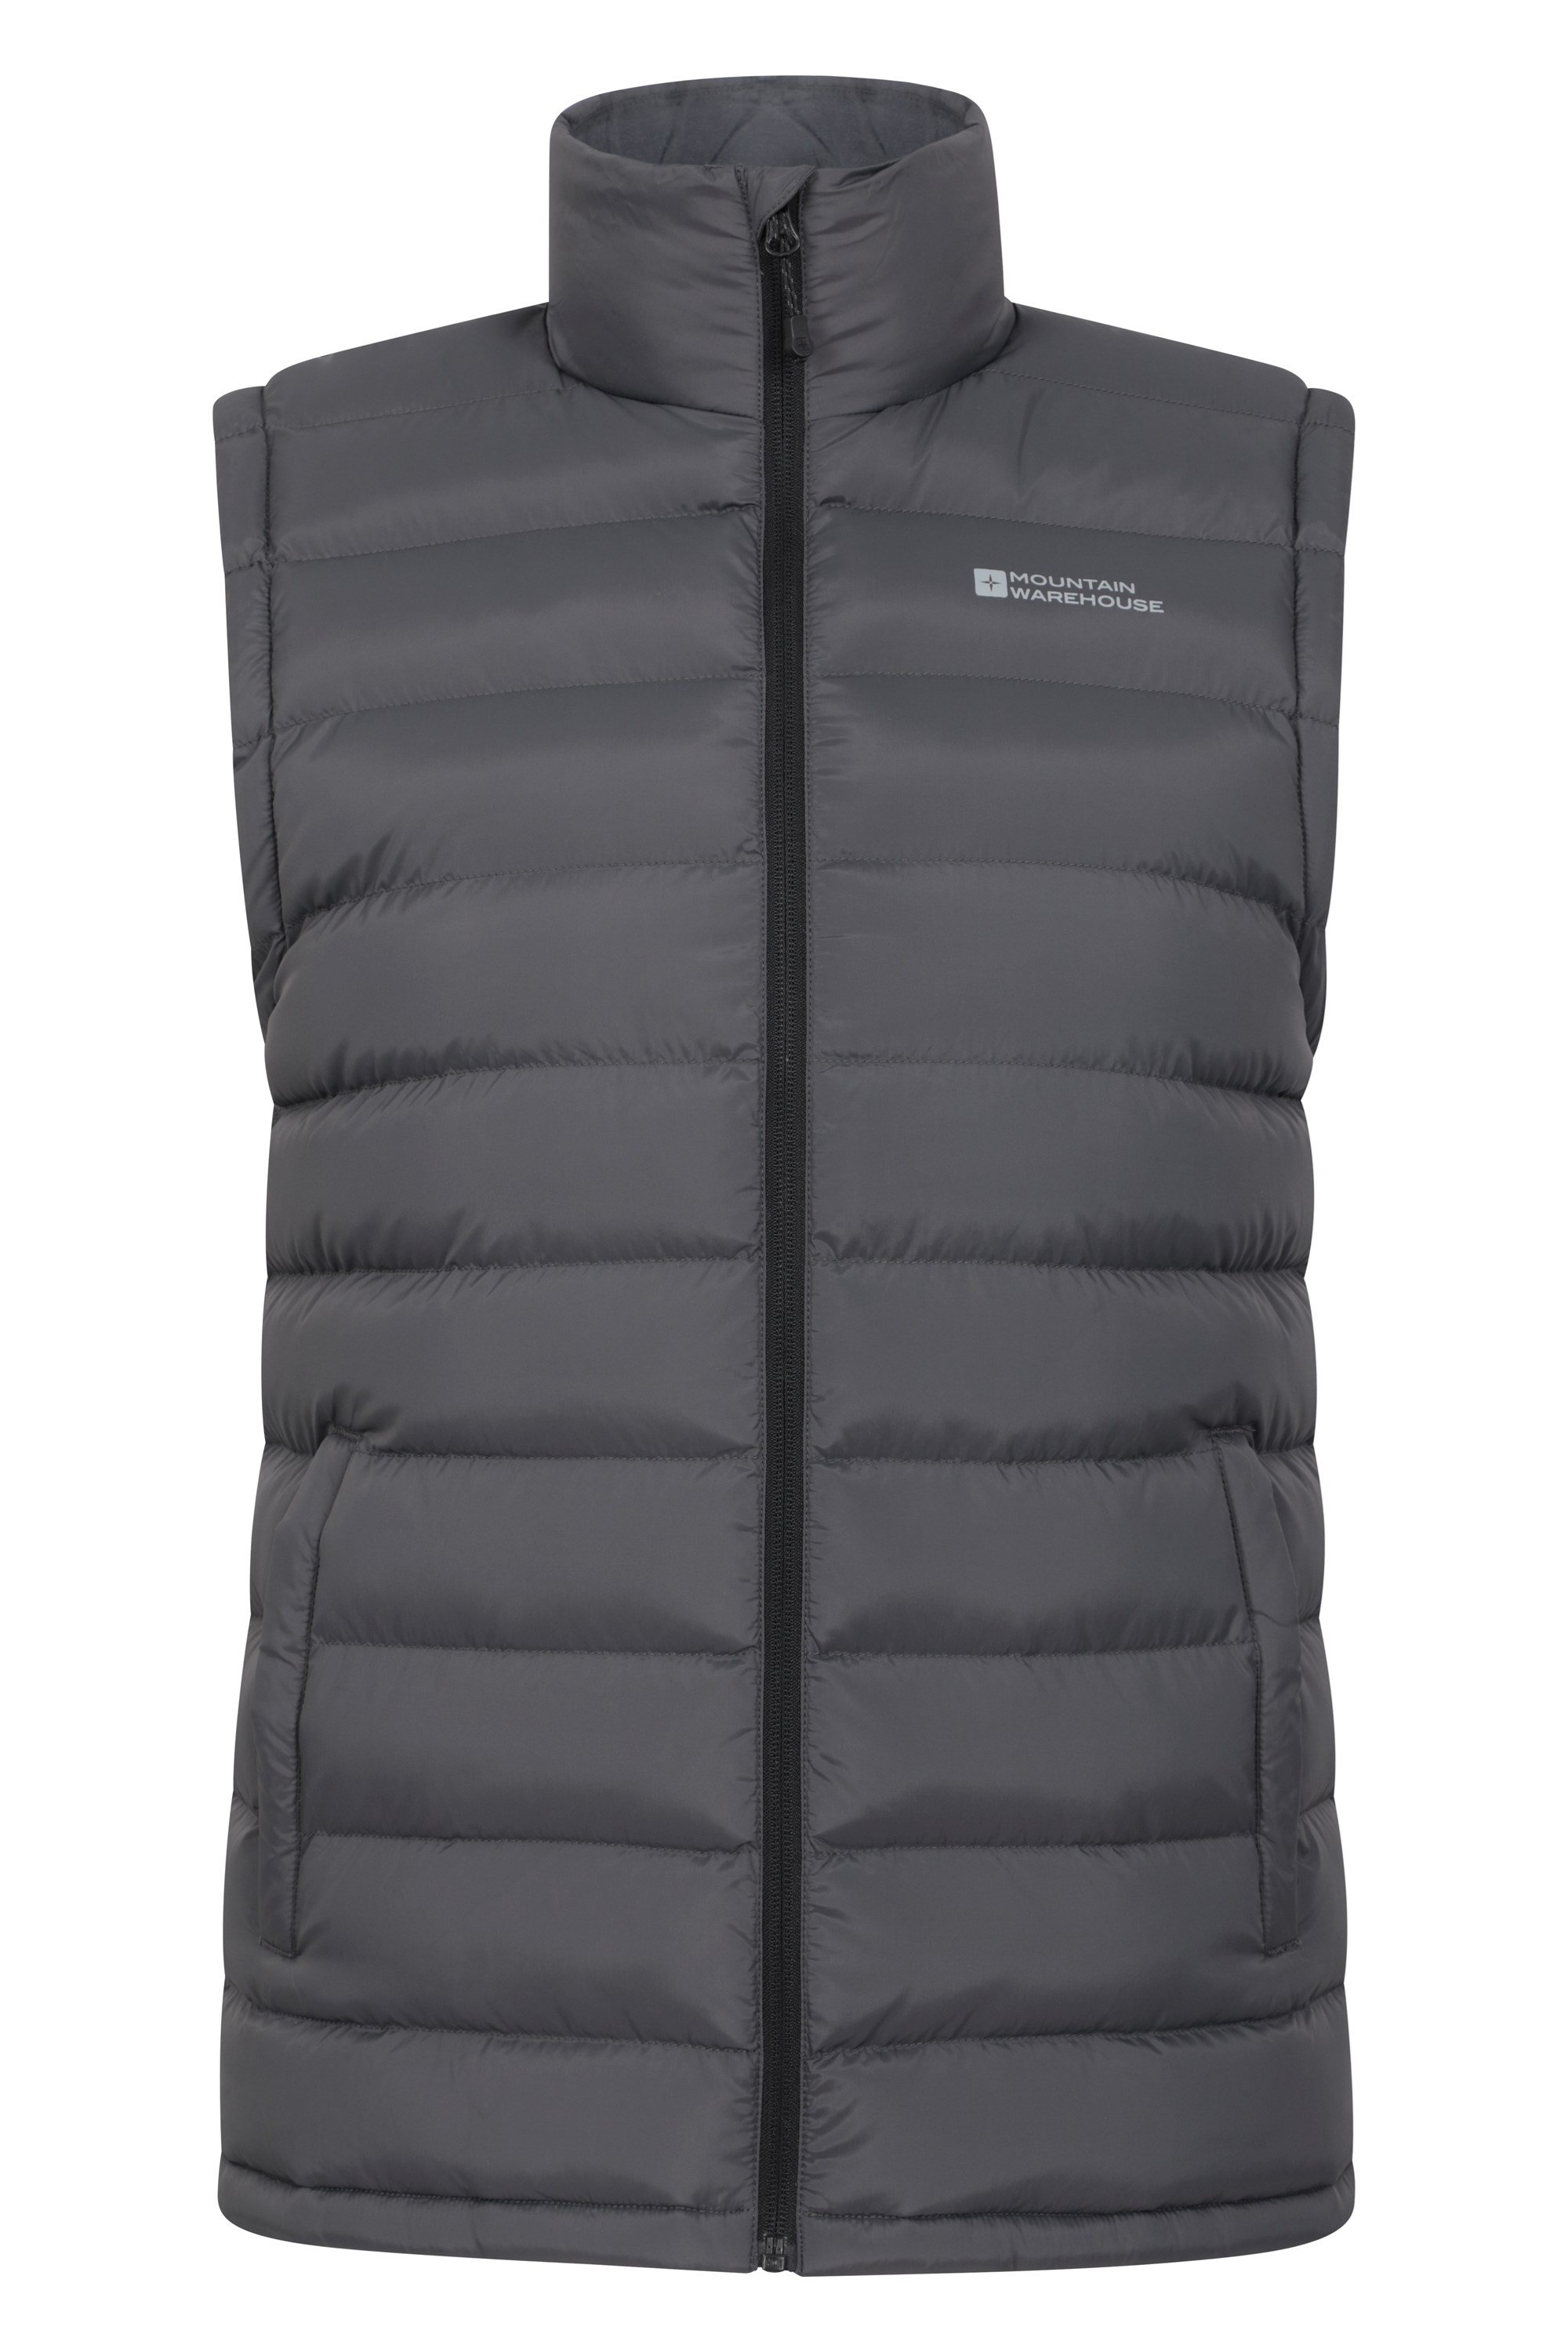 Walking Mountain Warehouse Seasons Mens Padded Gilet Lightweight Jacket Body Warmer for Winter Travelling Easy to Store Coat Water Resistant Gilet 